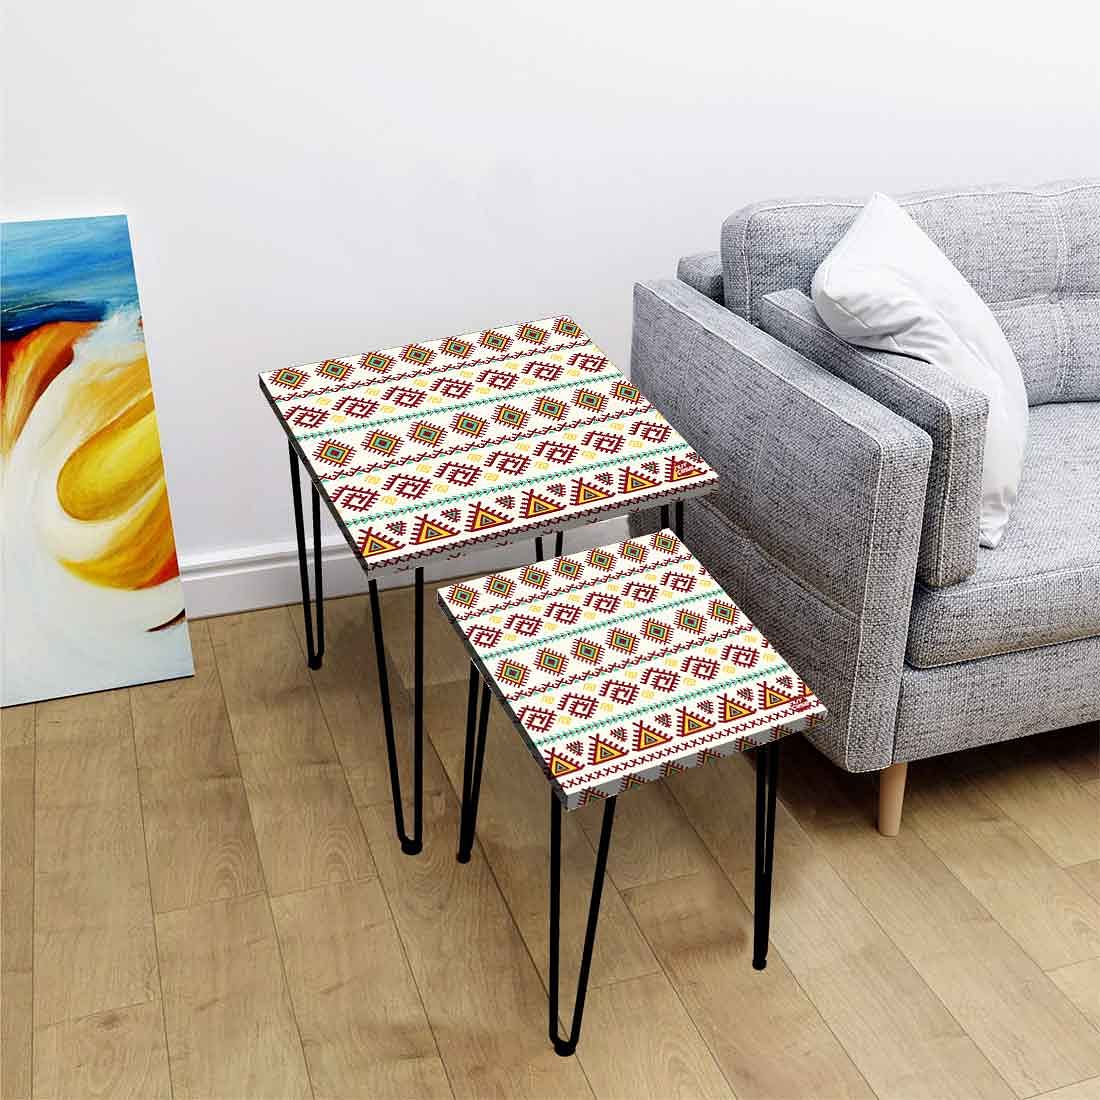 Best Nesting Tables Set Of 2 with Aztec White Green Printed Top Nutcase